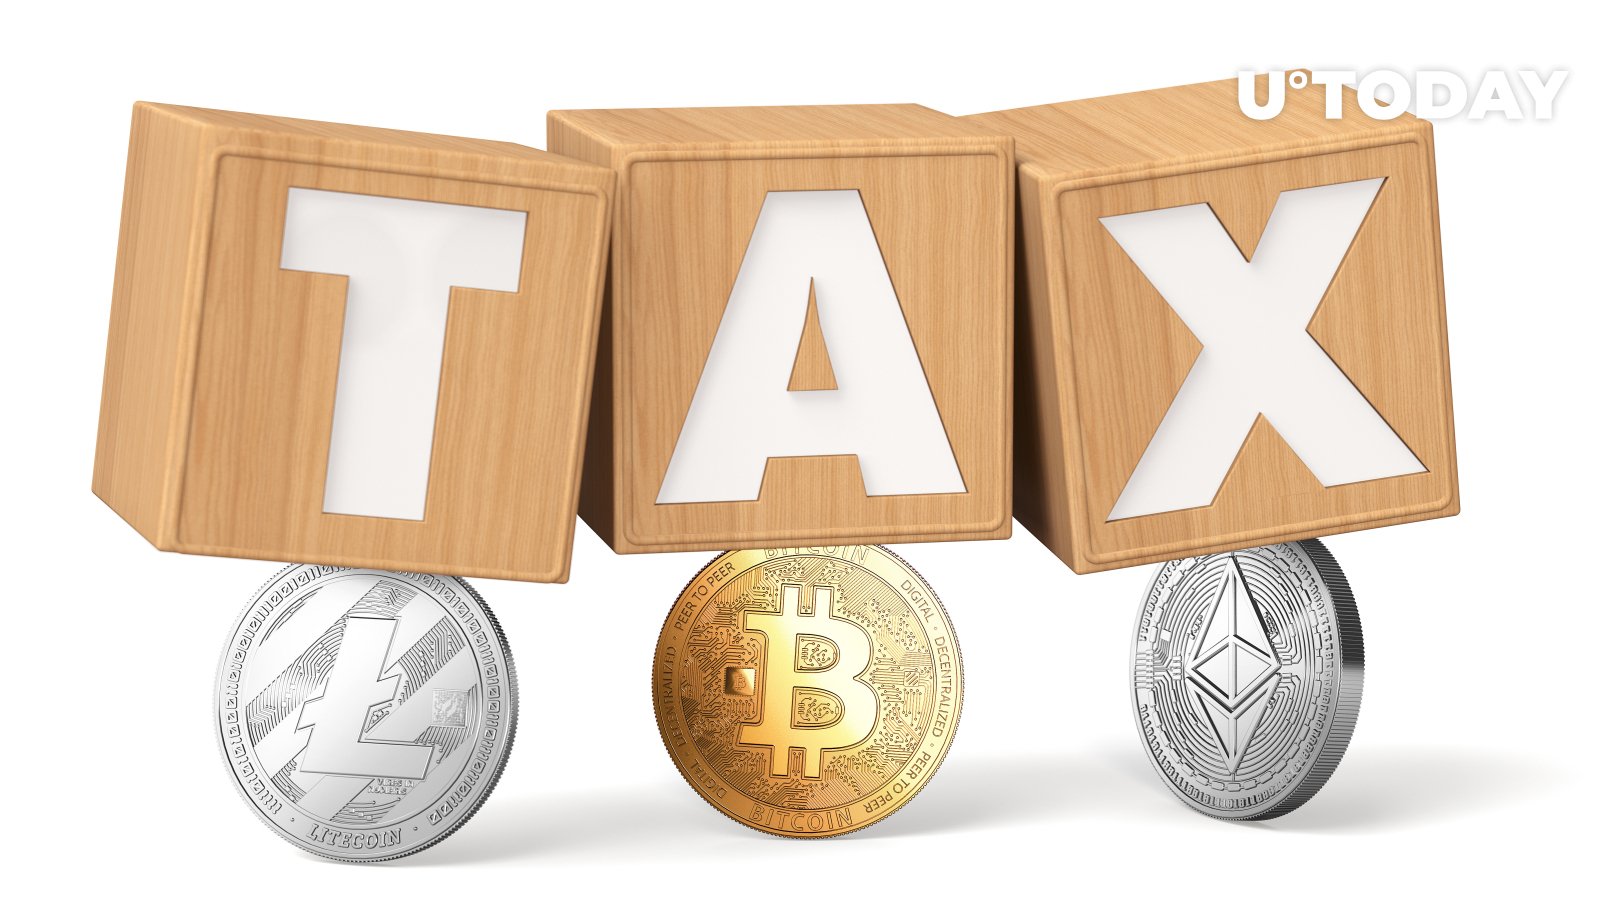 eu-country-to-reduce-cryptocurrency-tax-by-50-percent-to-attract